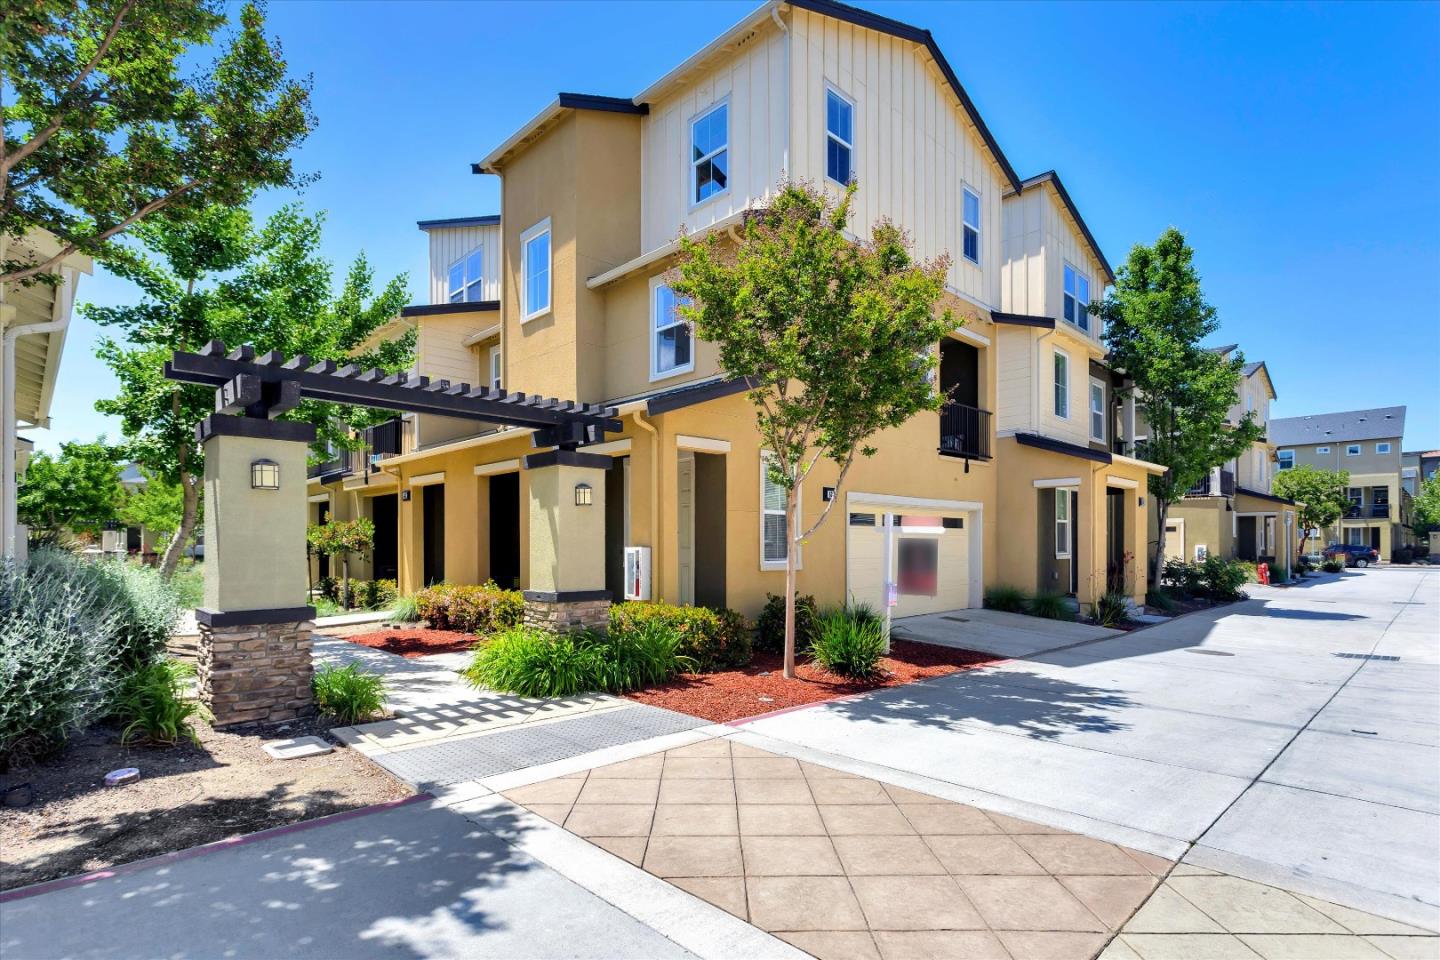 Browse active condo listings in COYOTE CREEK MILPITAS